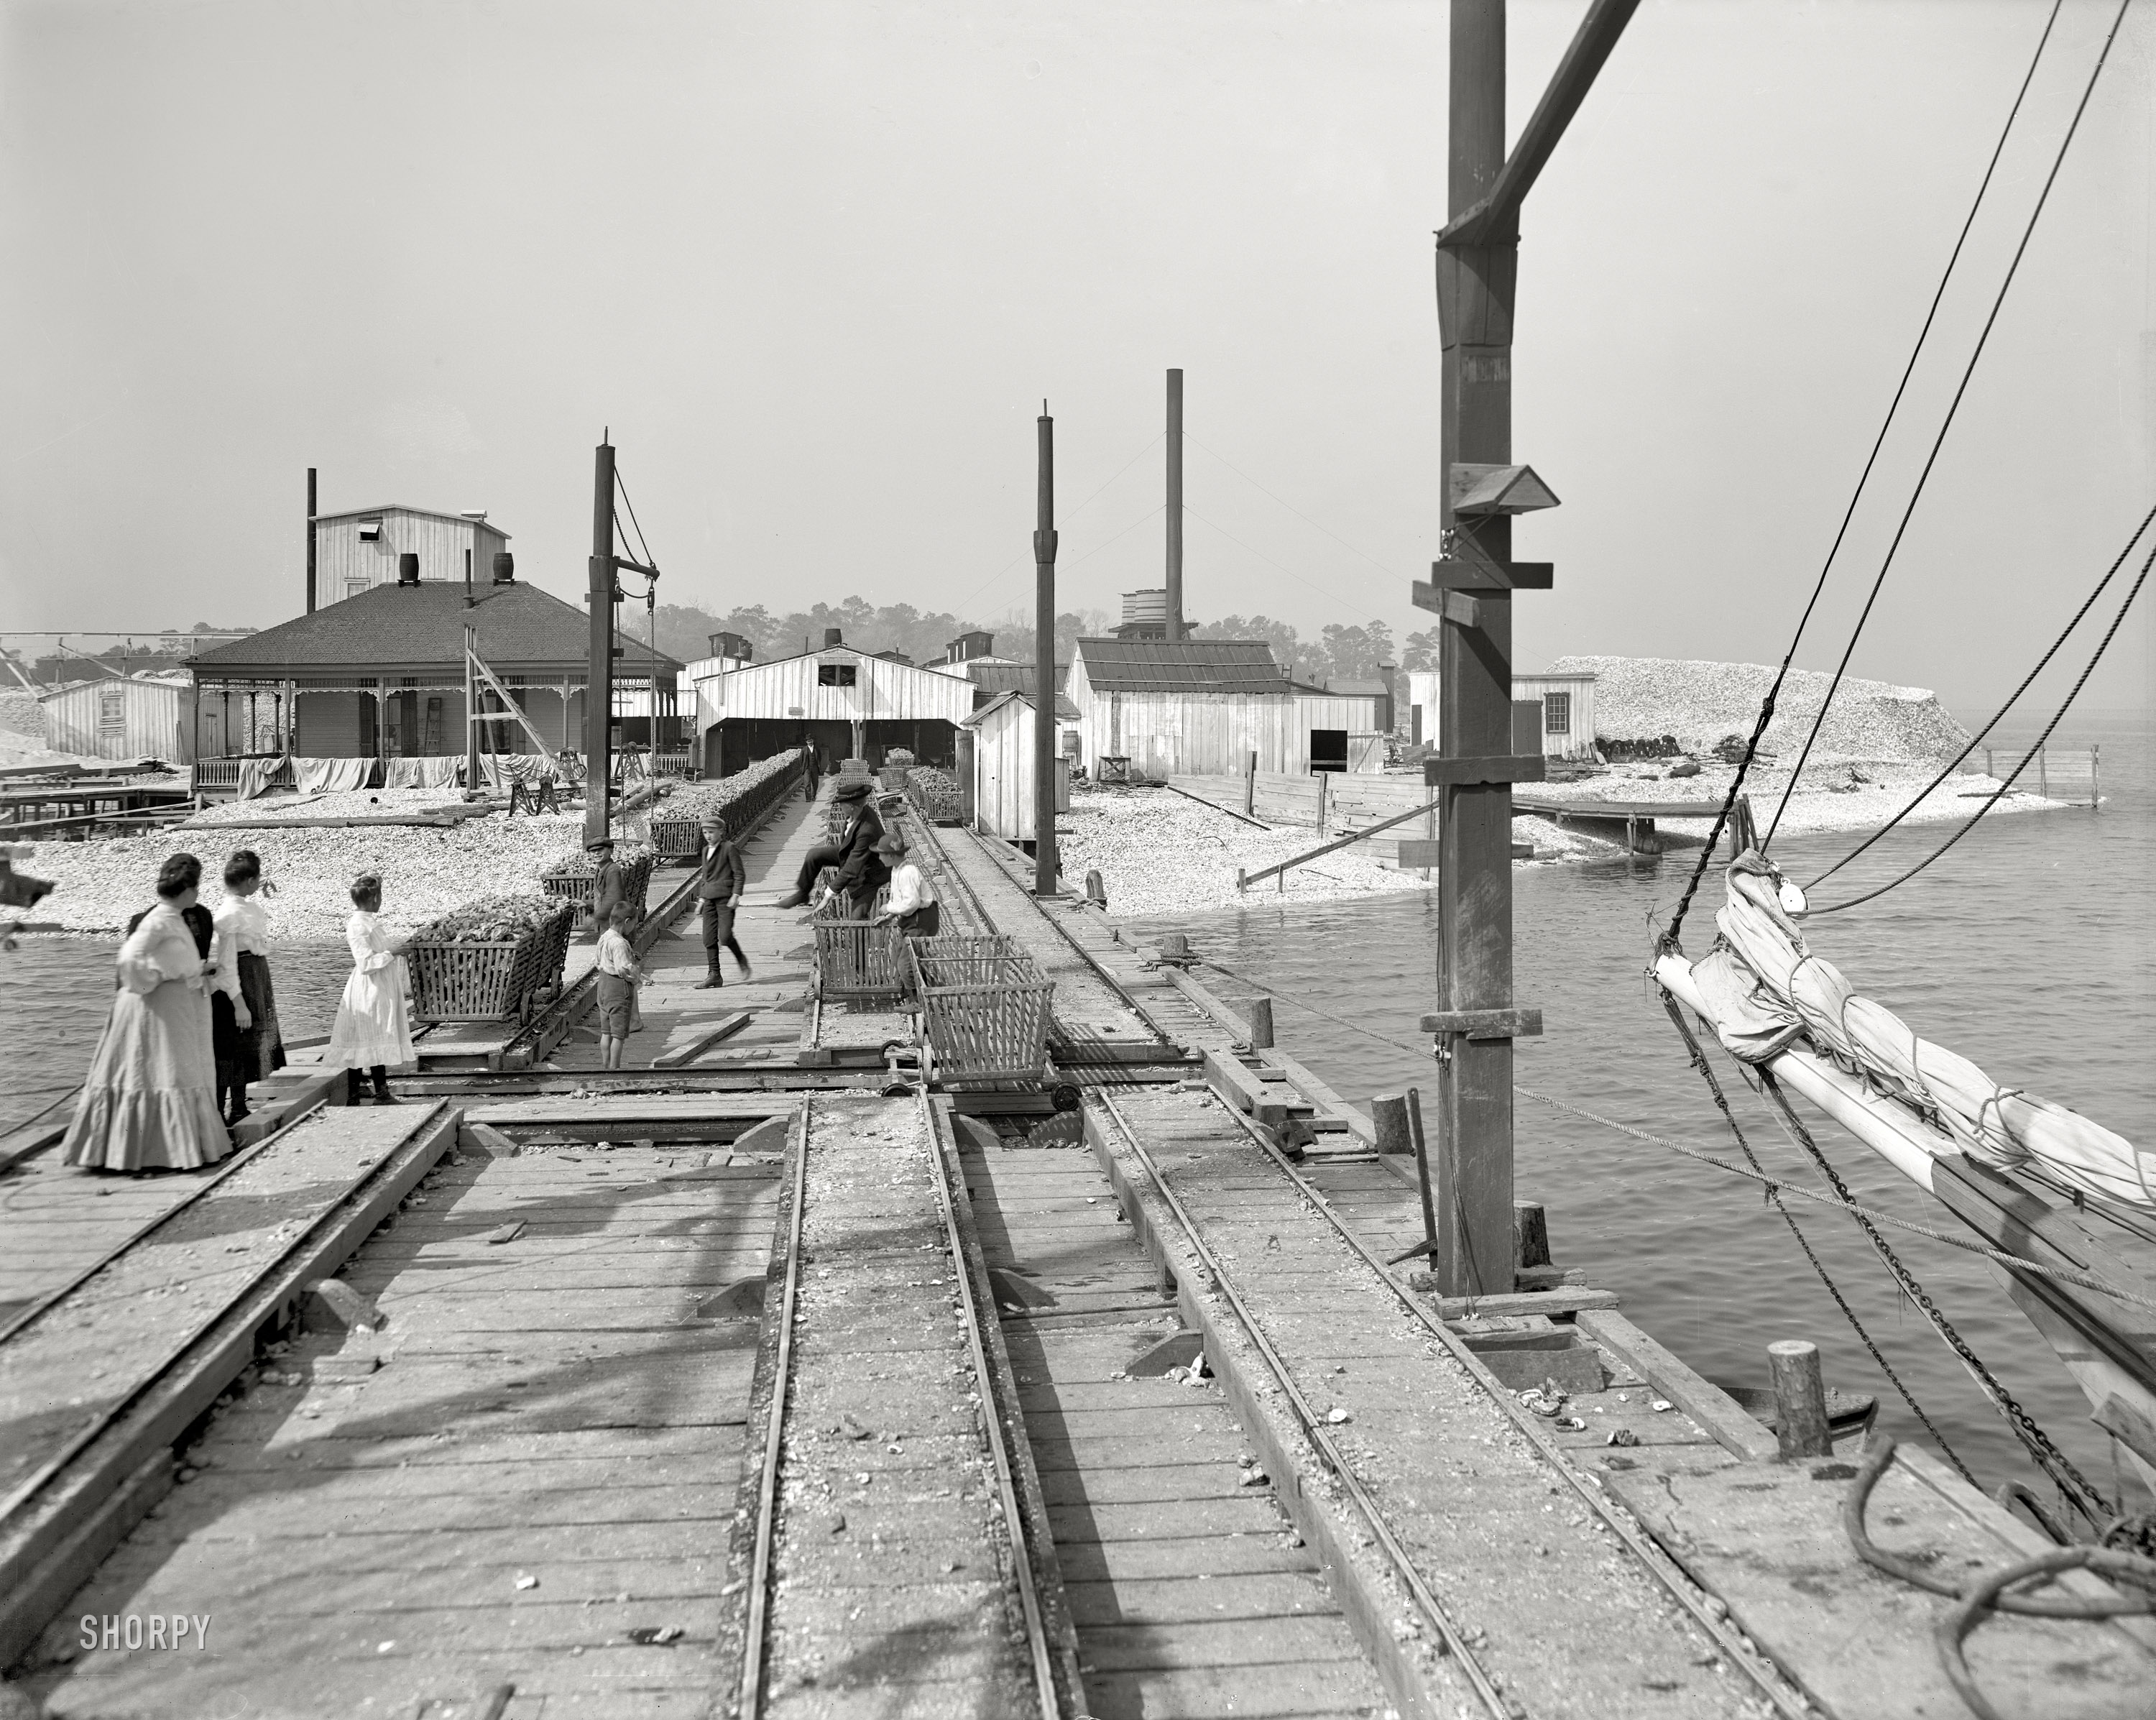 Biloxi, Mississippi, circa 1906. "Point oyster houses." Just add ice and beer. 8x10 inch dry plate glass negative, Detroit Publishing Company. View full size.